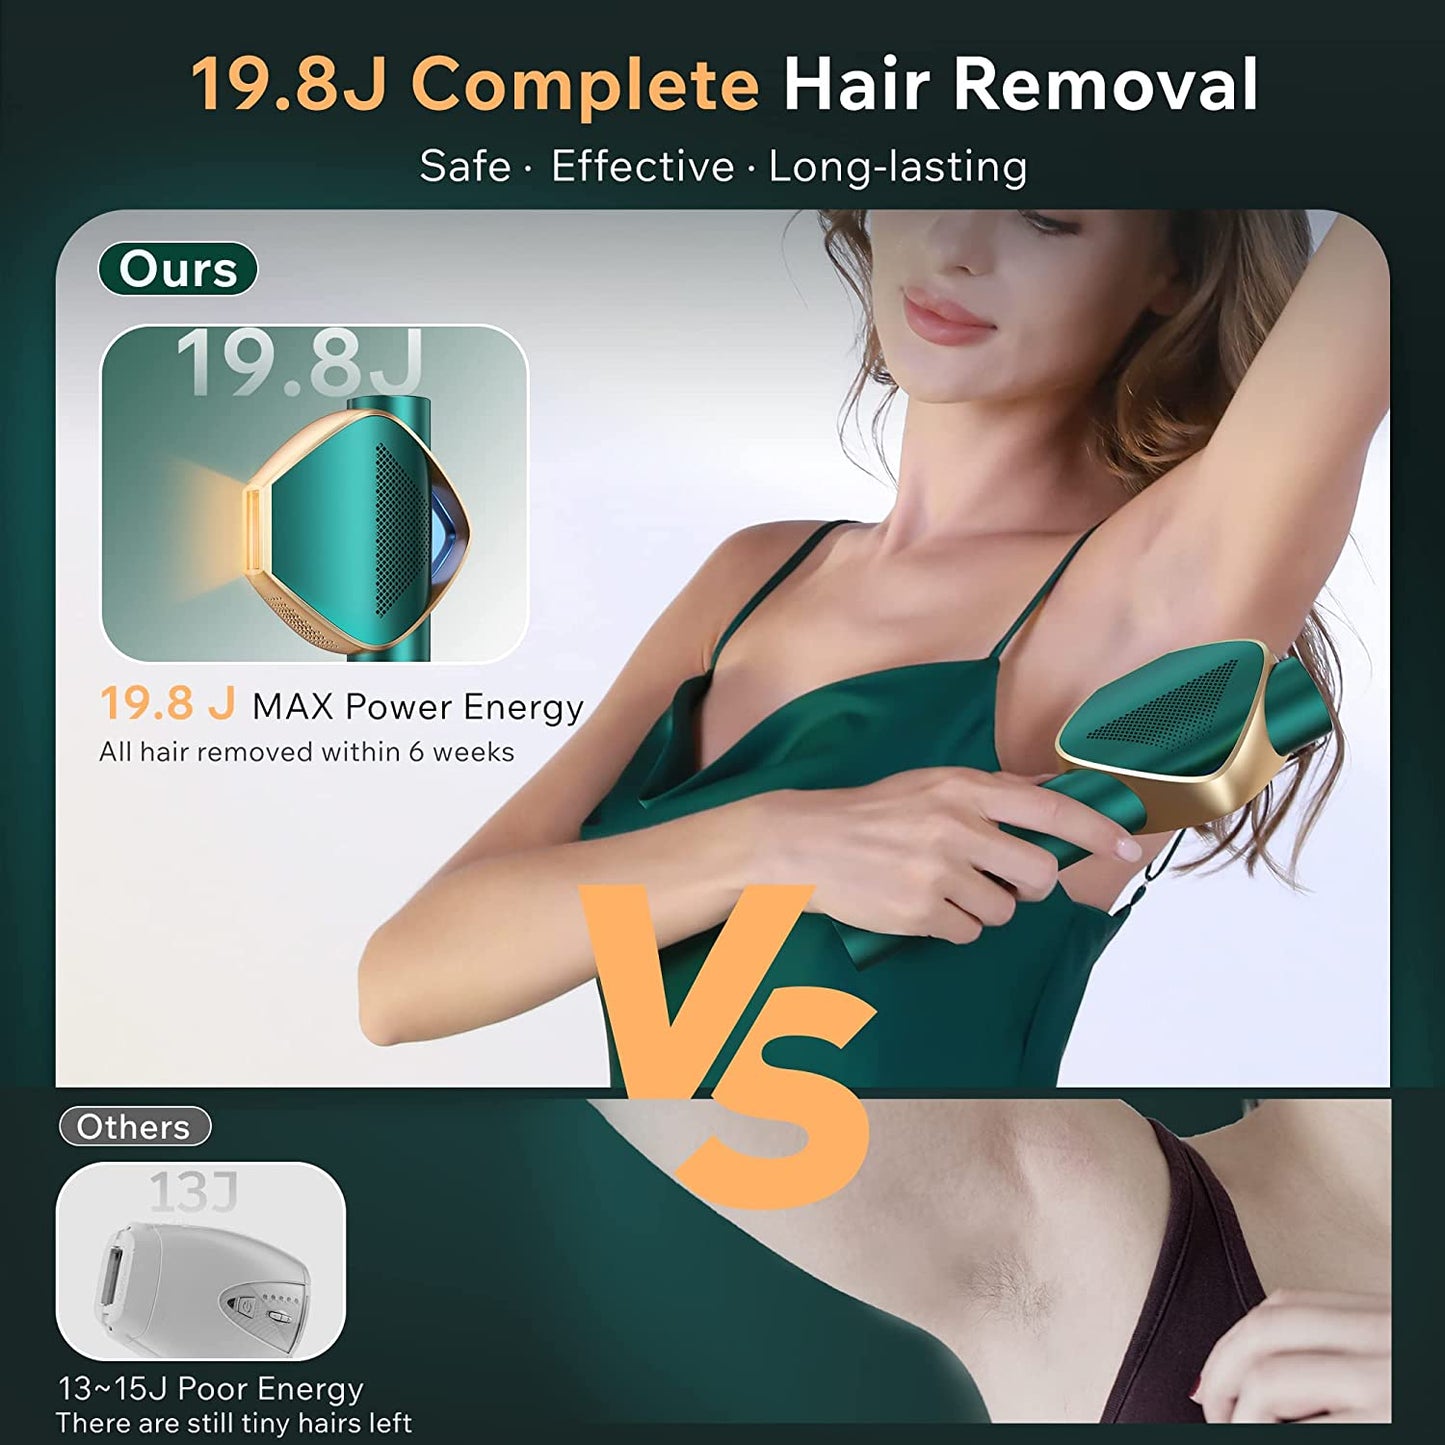 AMINZER IPL Devices Hair Removal Laser with 999,900 Light Pulses 9 Energy Levels and 3 Extended Functions HR/SC/RA Permanent Painless Hair Removal Device for Men and Women